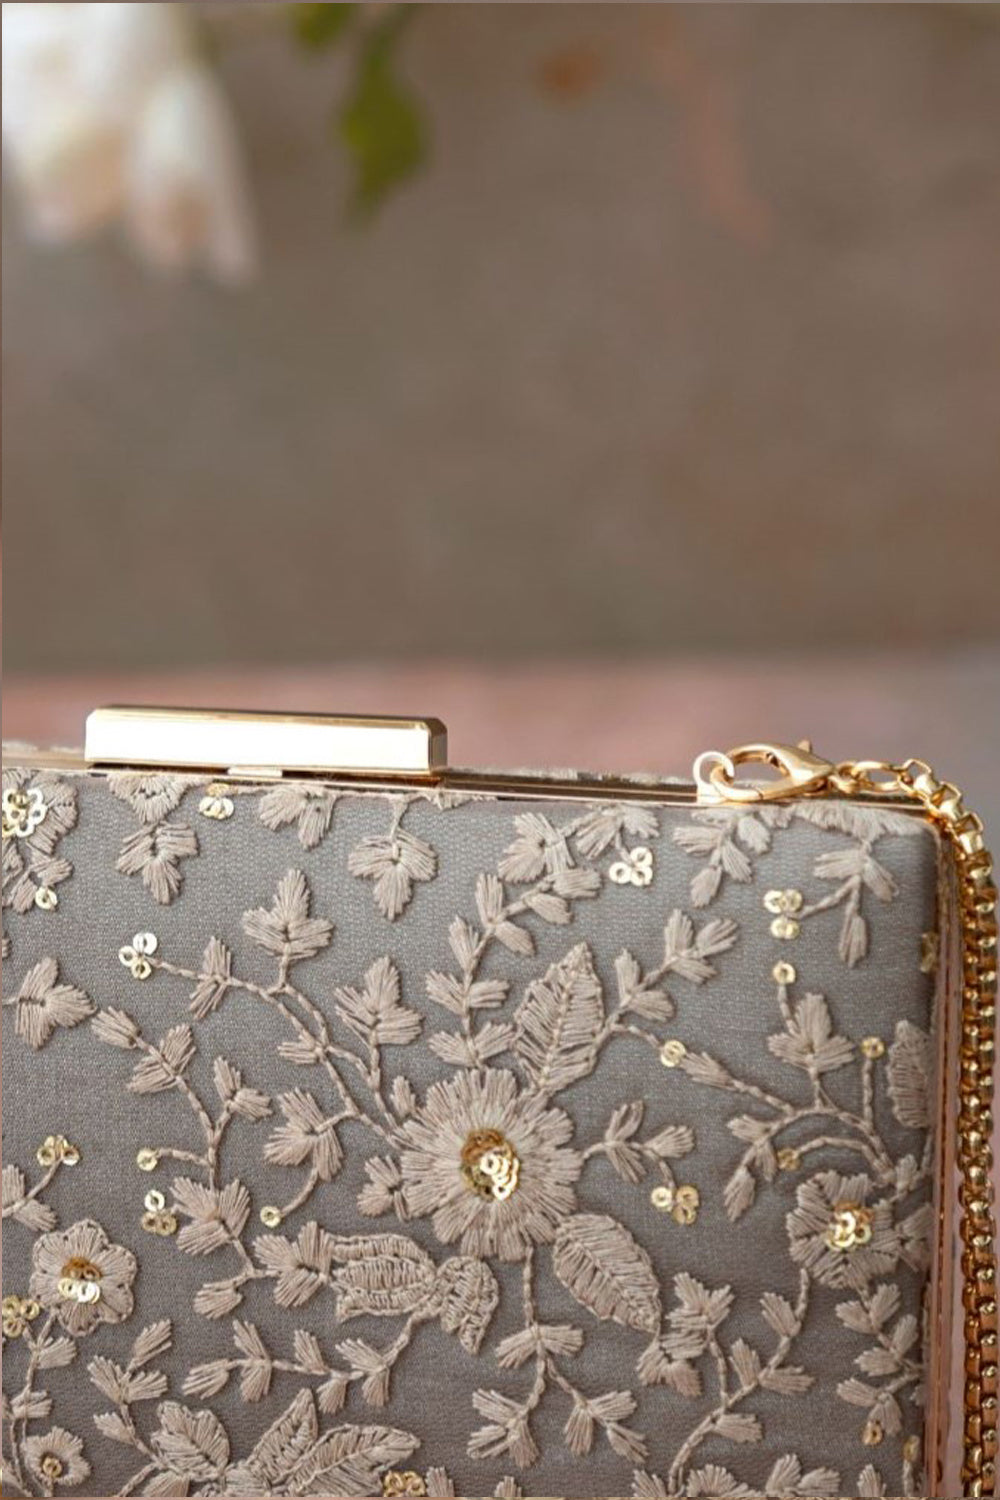 Grey Embroidered Box Clutch